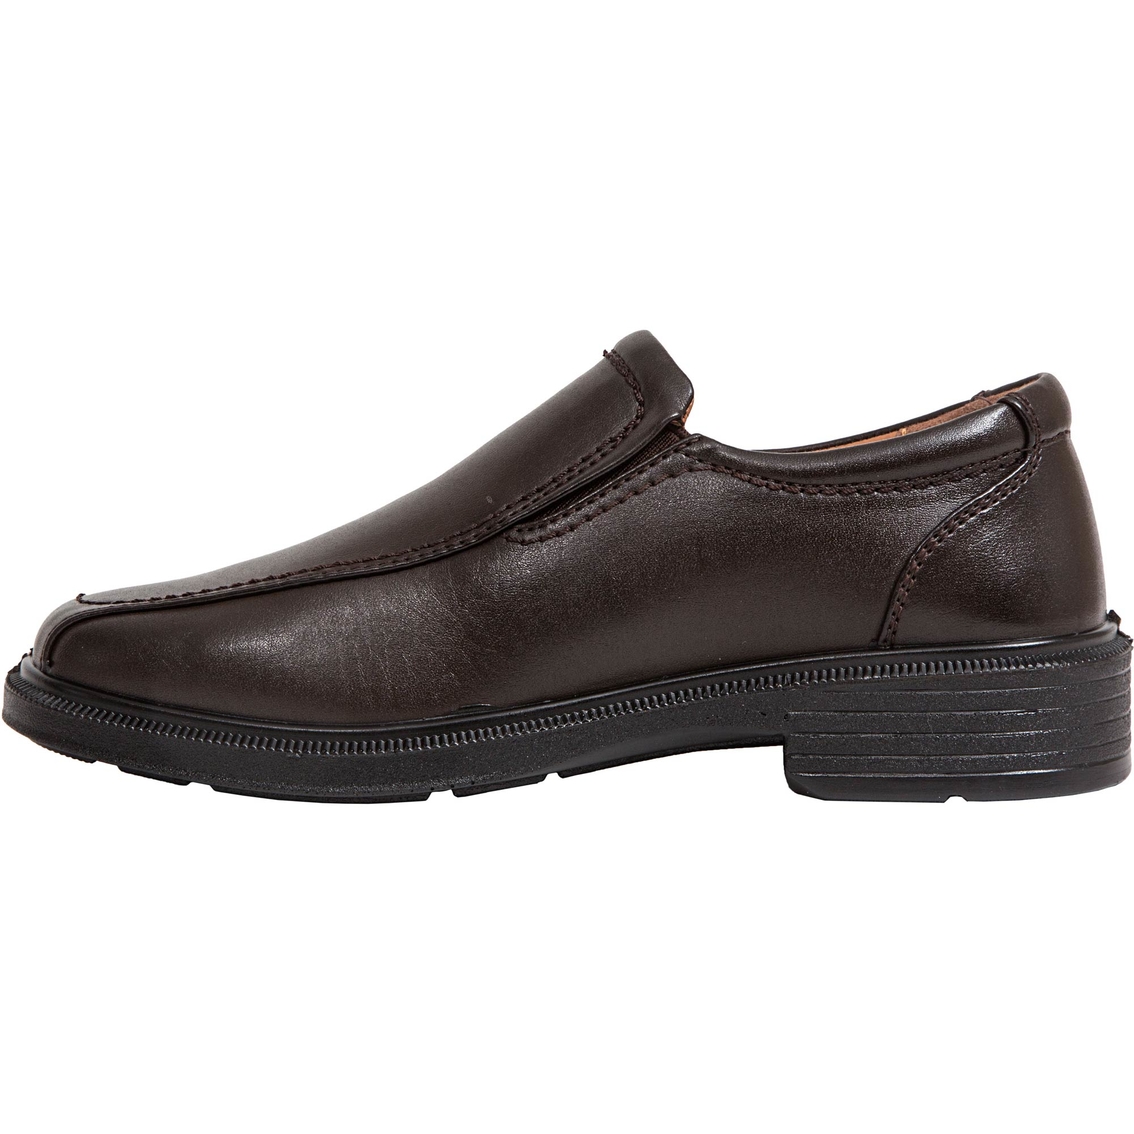 Deer Stags Boys Greenpoint Jr. Slip On Dress Shoes - Image 4 of 6